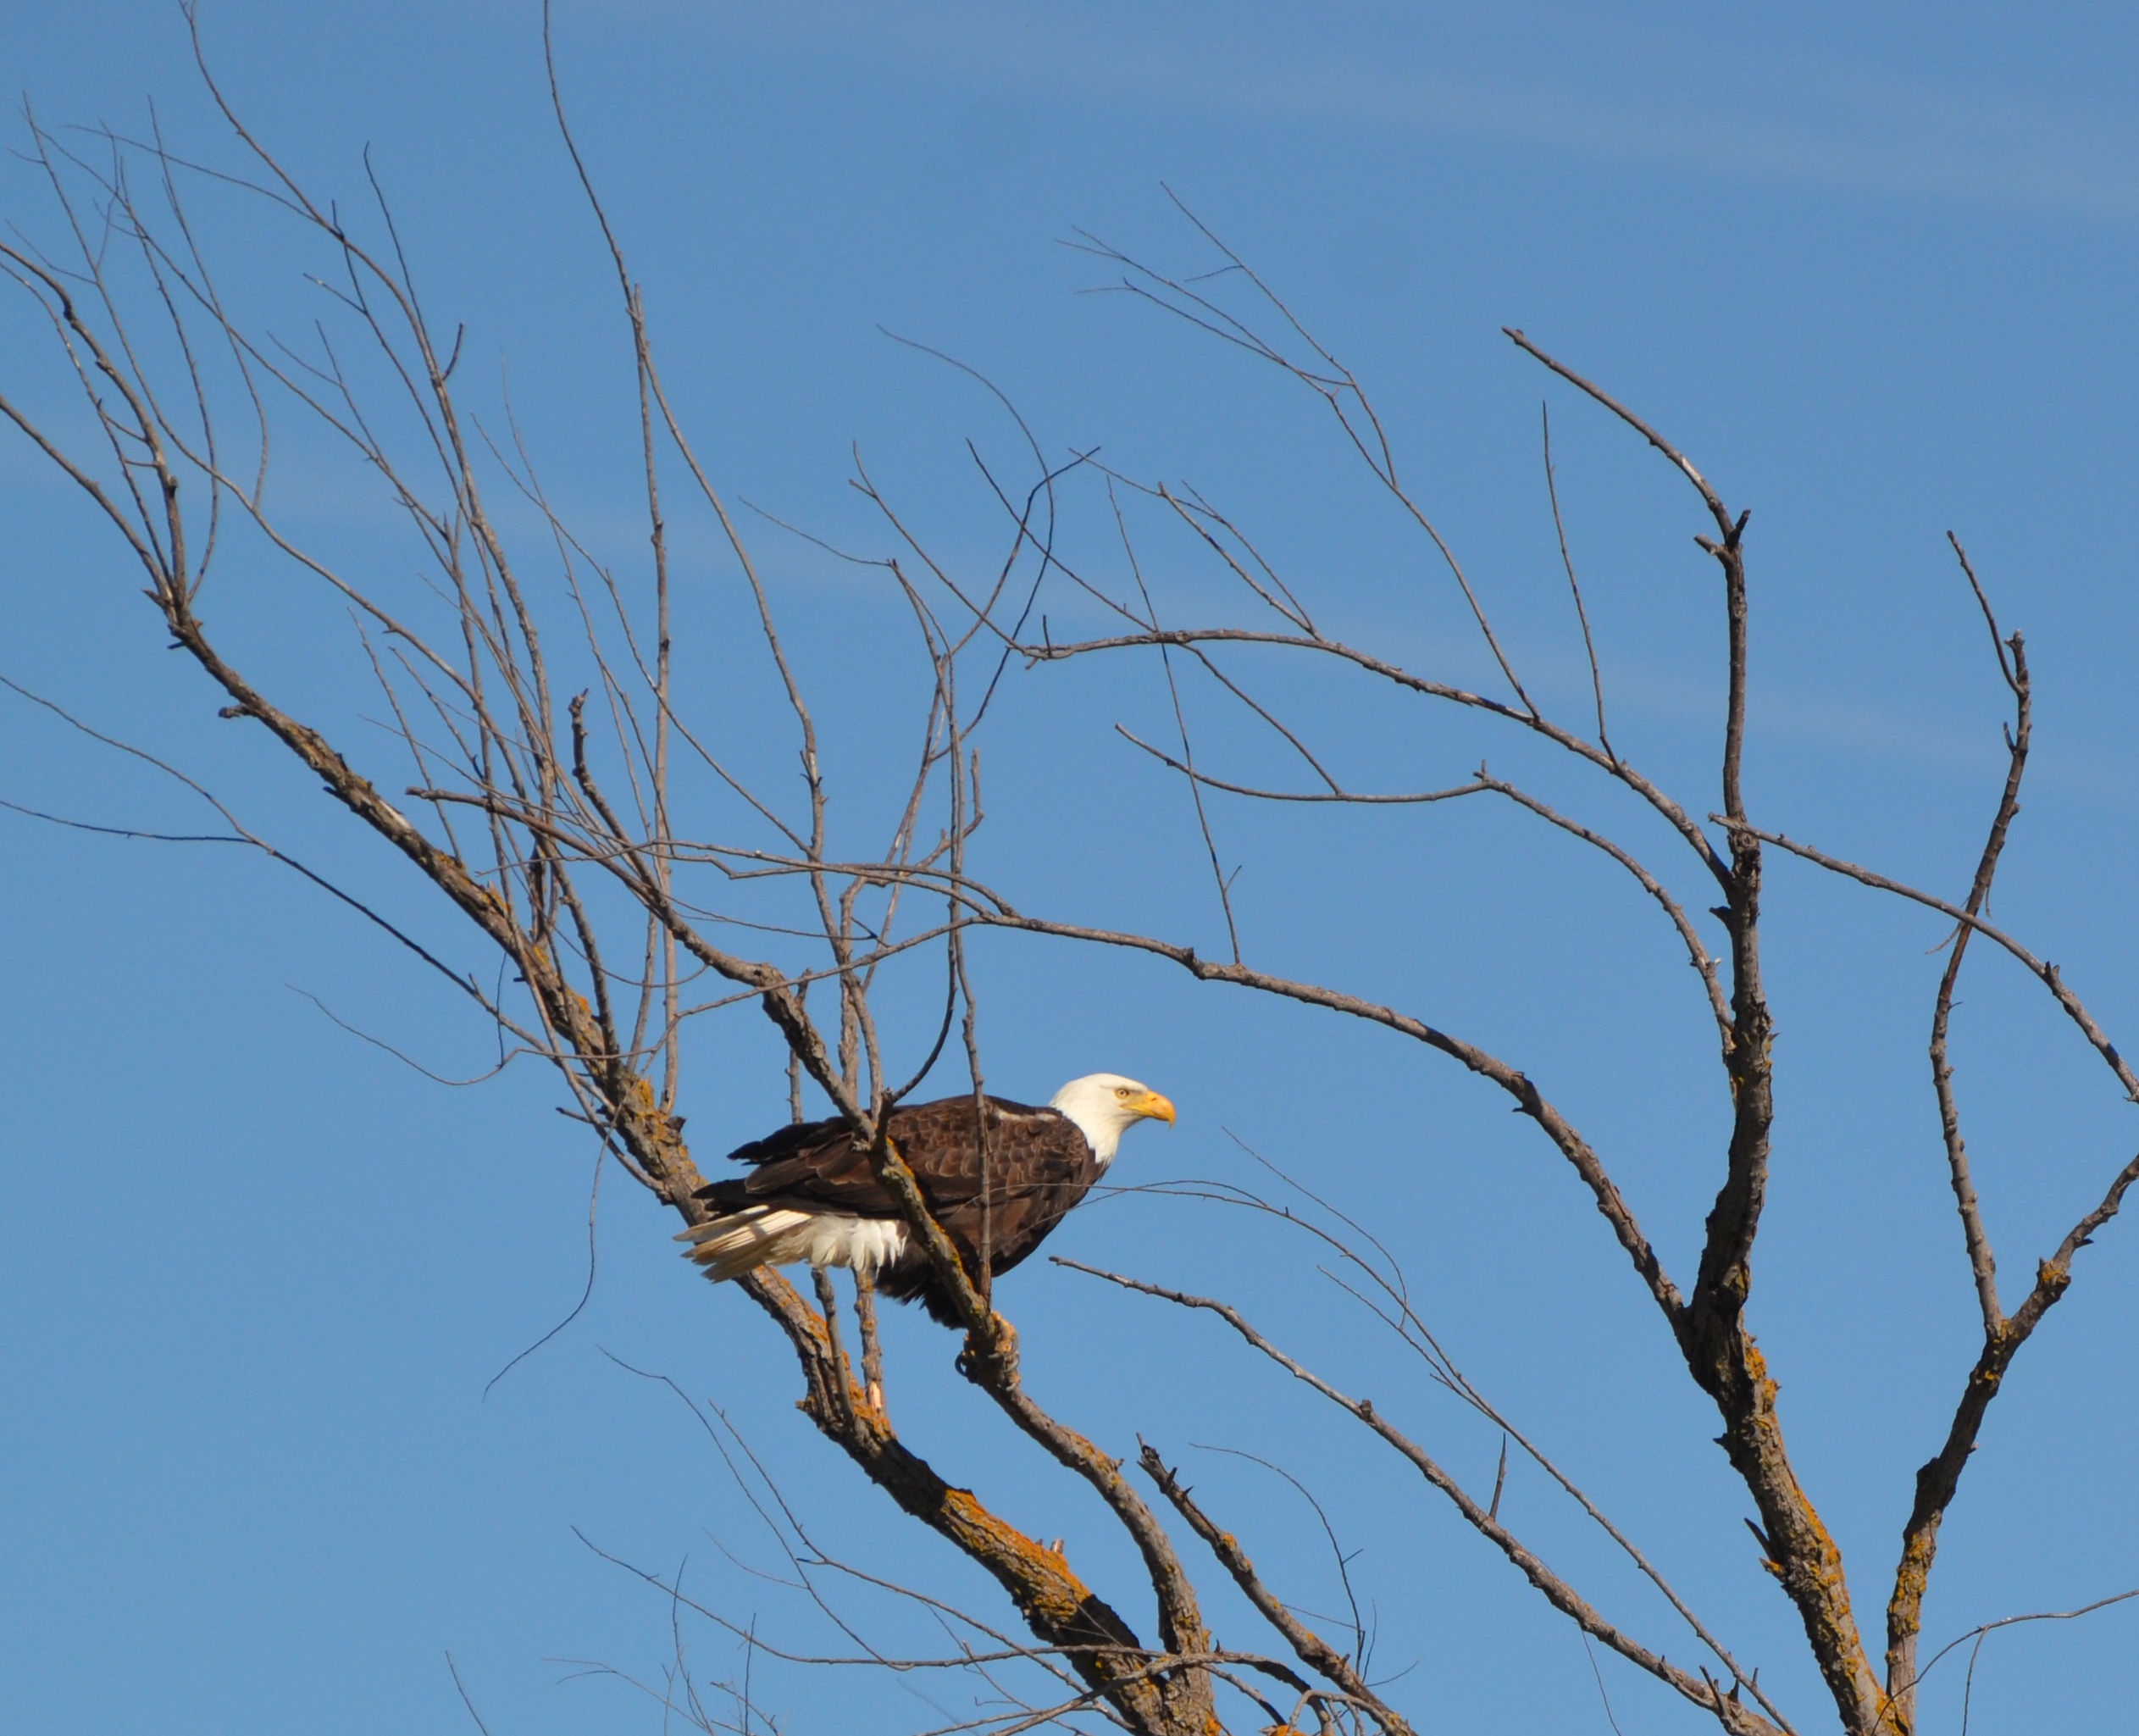 side profile of a Bald eagle perched on a branch of a bare tree against a clear blue sky